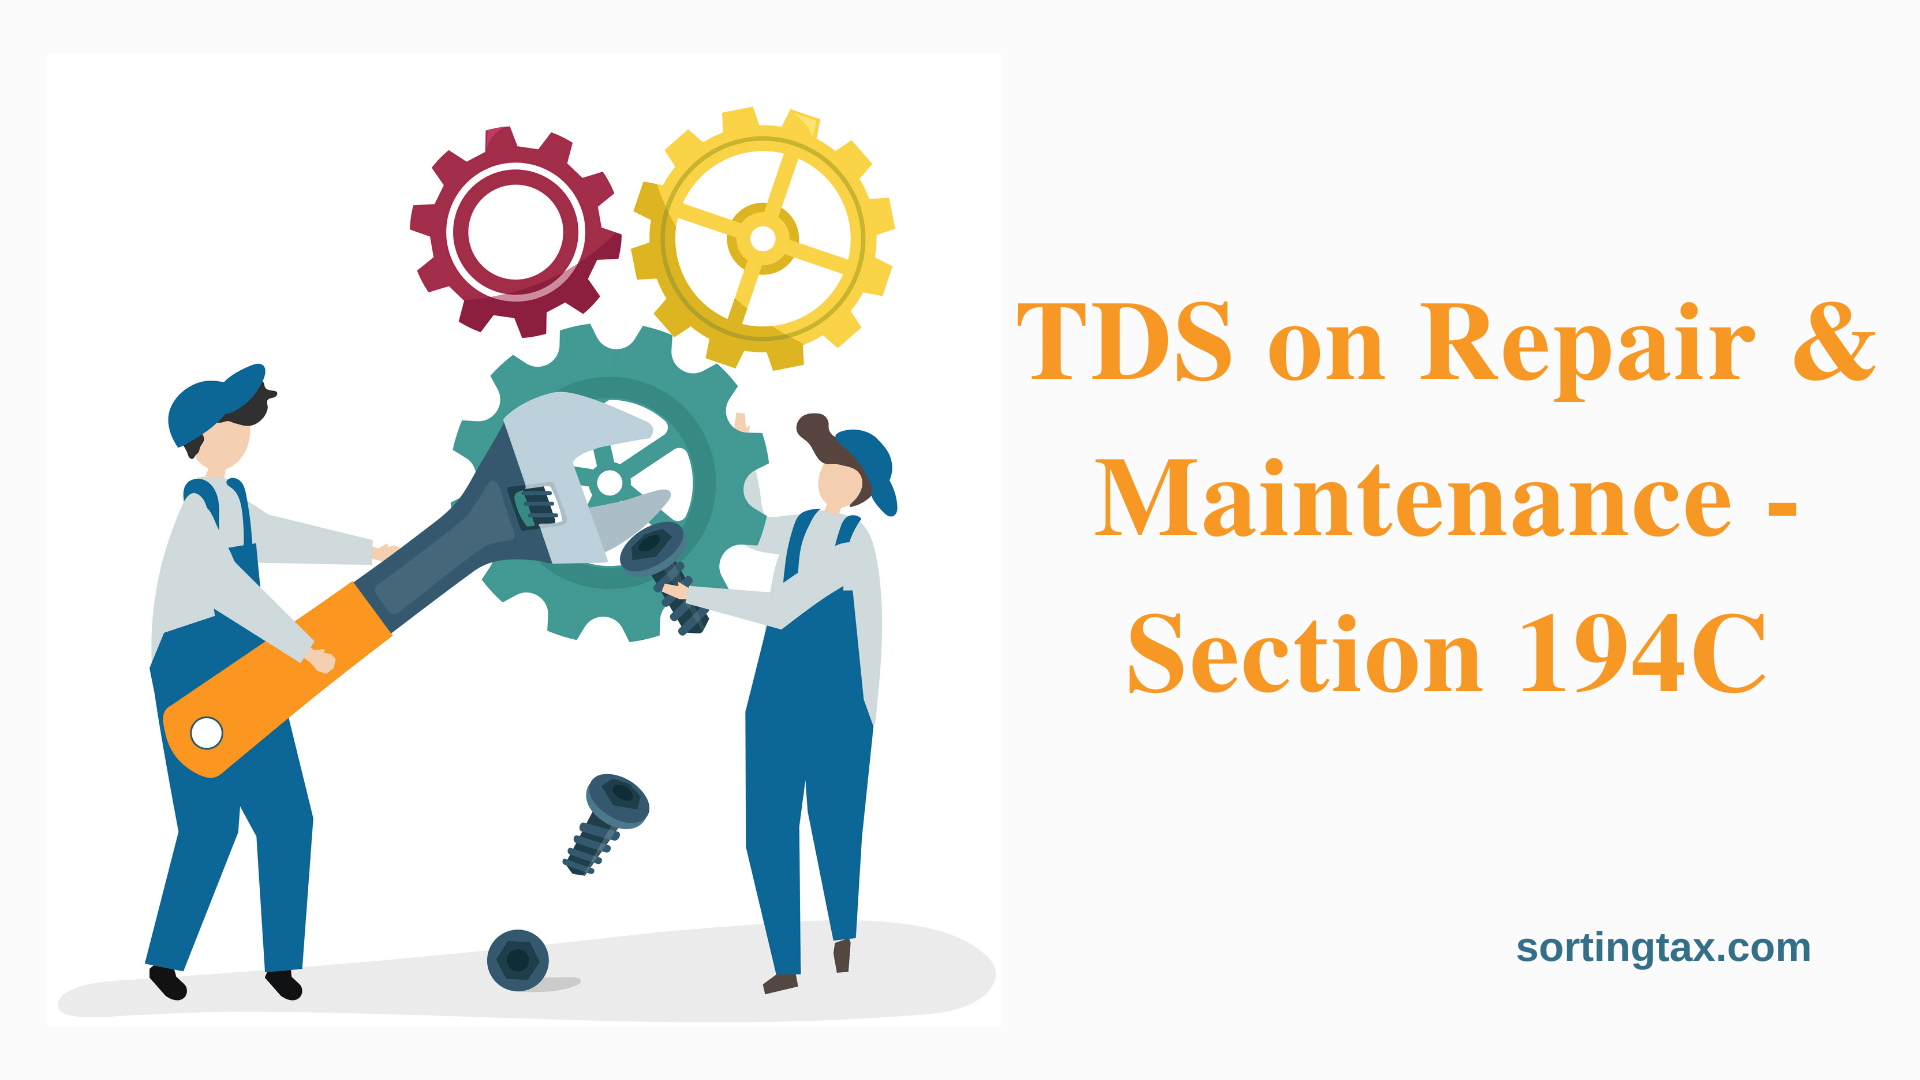 TDS on repair and maintenance - Section 194C